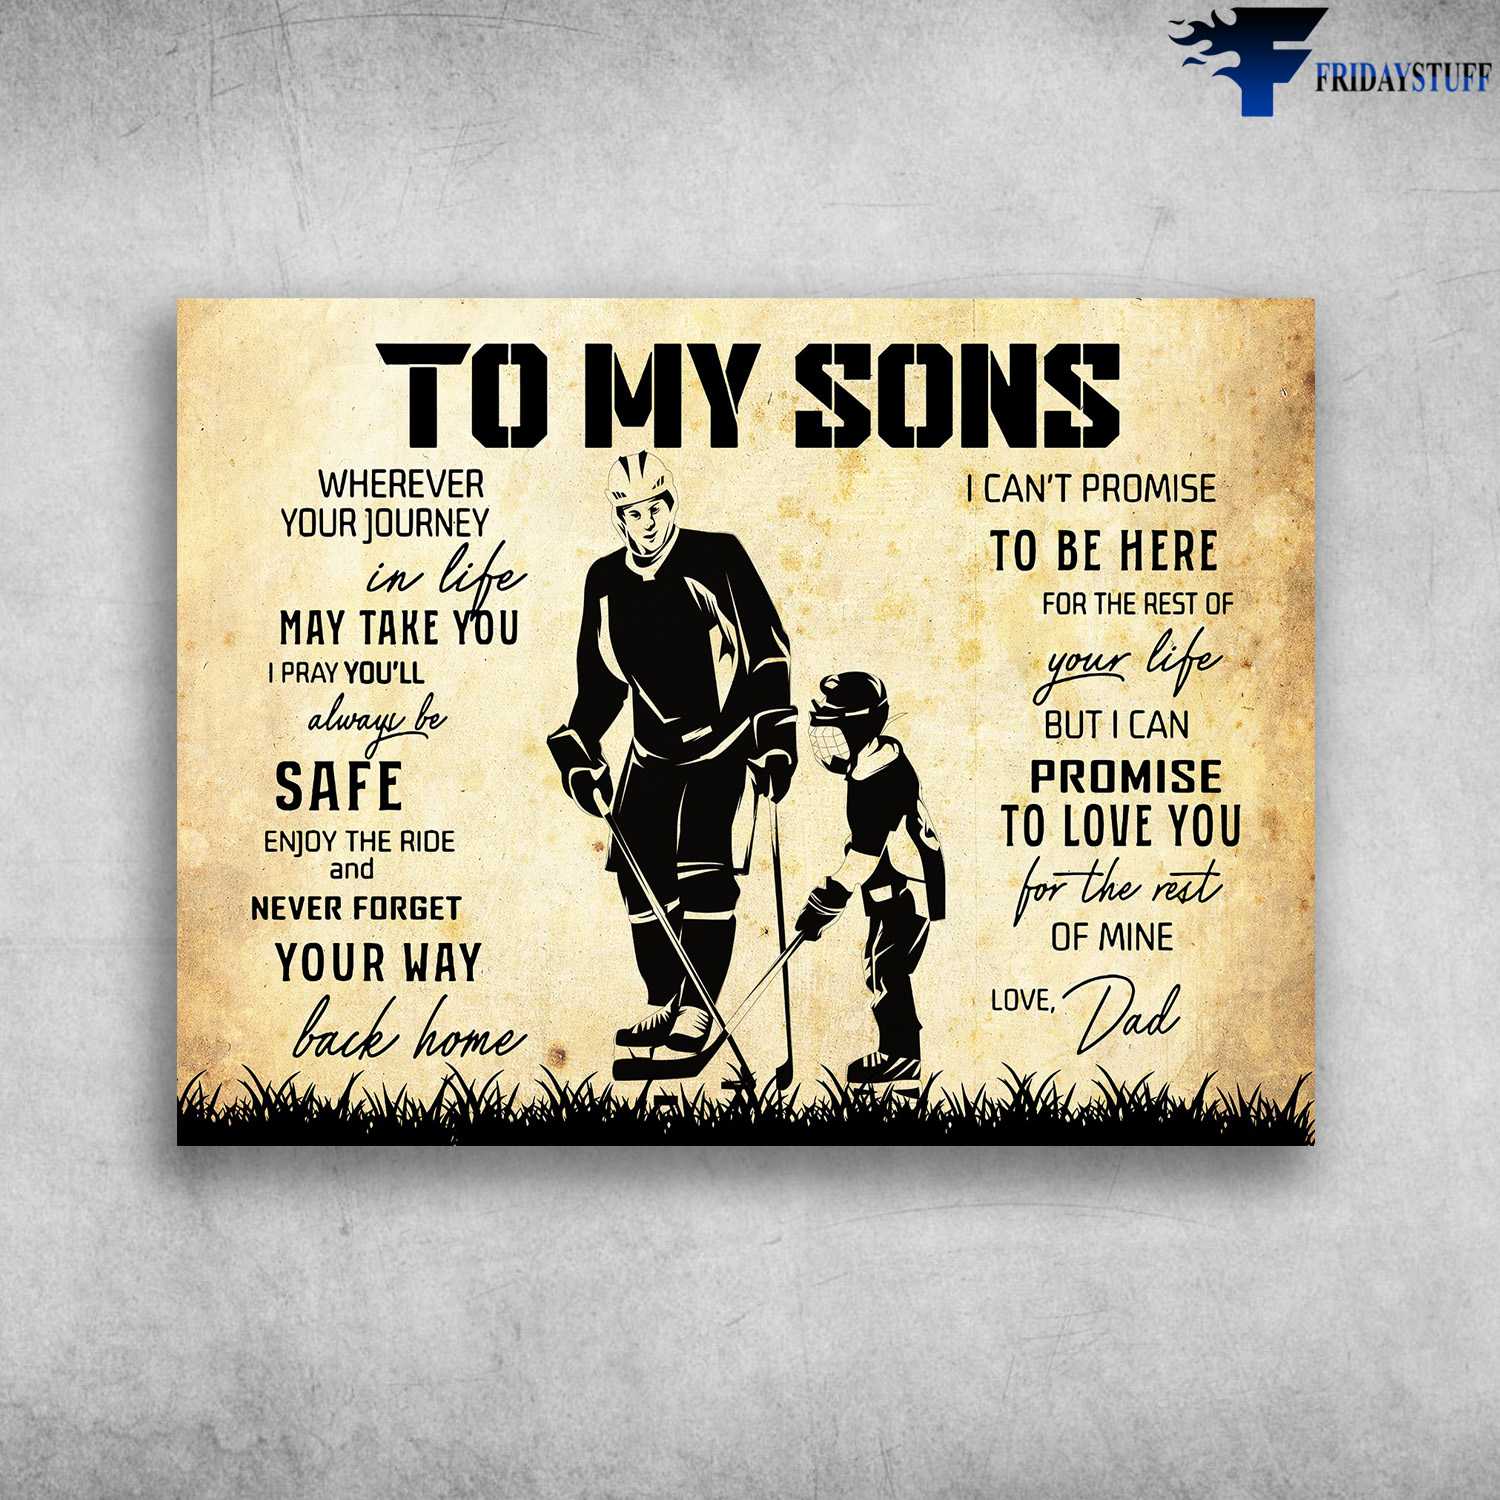 Hockey Player, Dad And Son, To My Sons - Wherever Your Journey In Life, May Take You, I Pray You'll Aways Be Safe, Enjoy The Ride, And Never Forget, Your Way Back Home